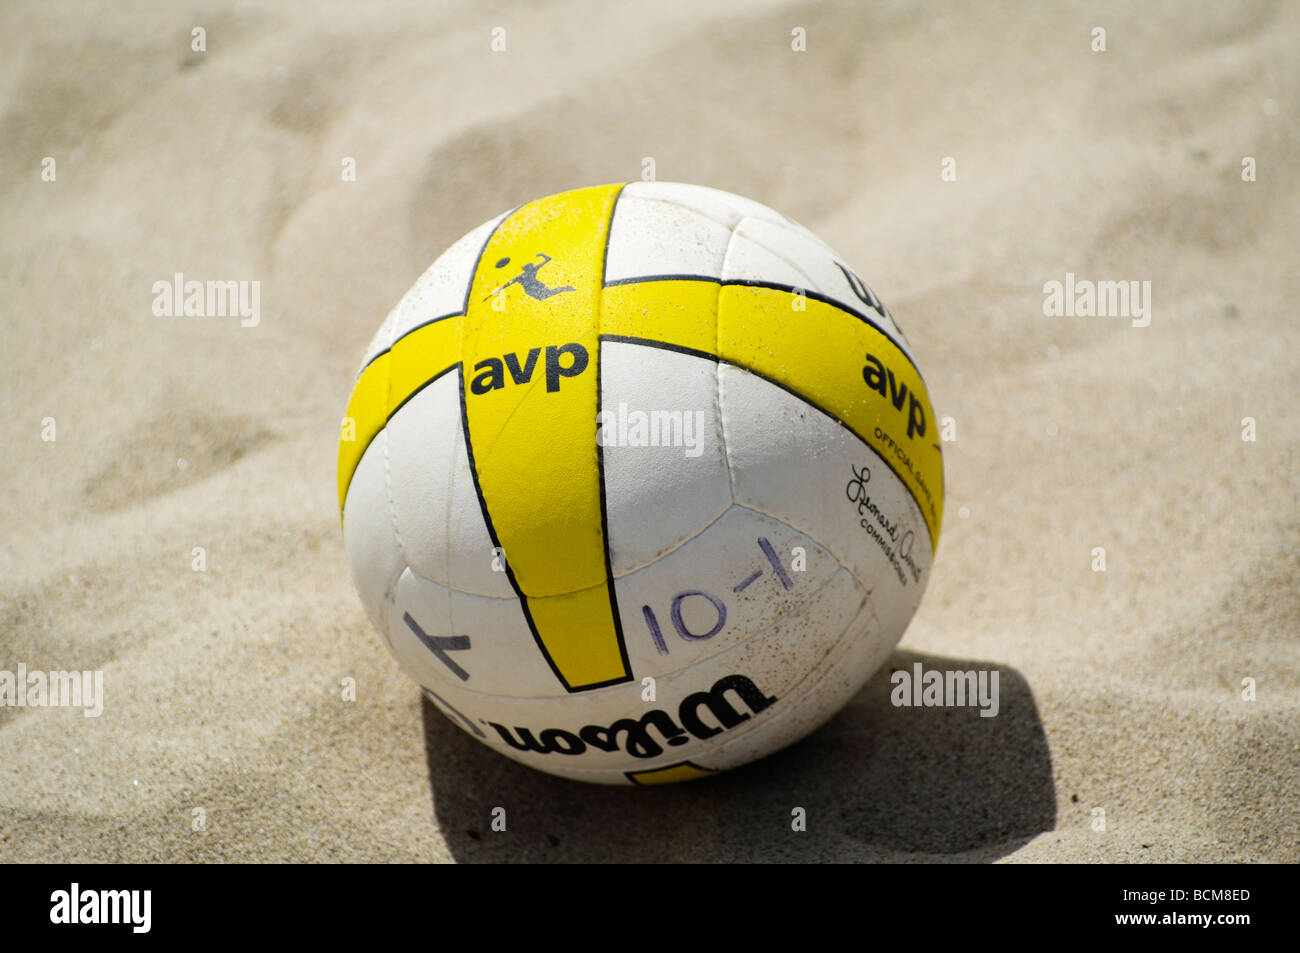 Official AVP beach volleyball in sand Stock Photo